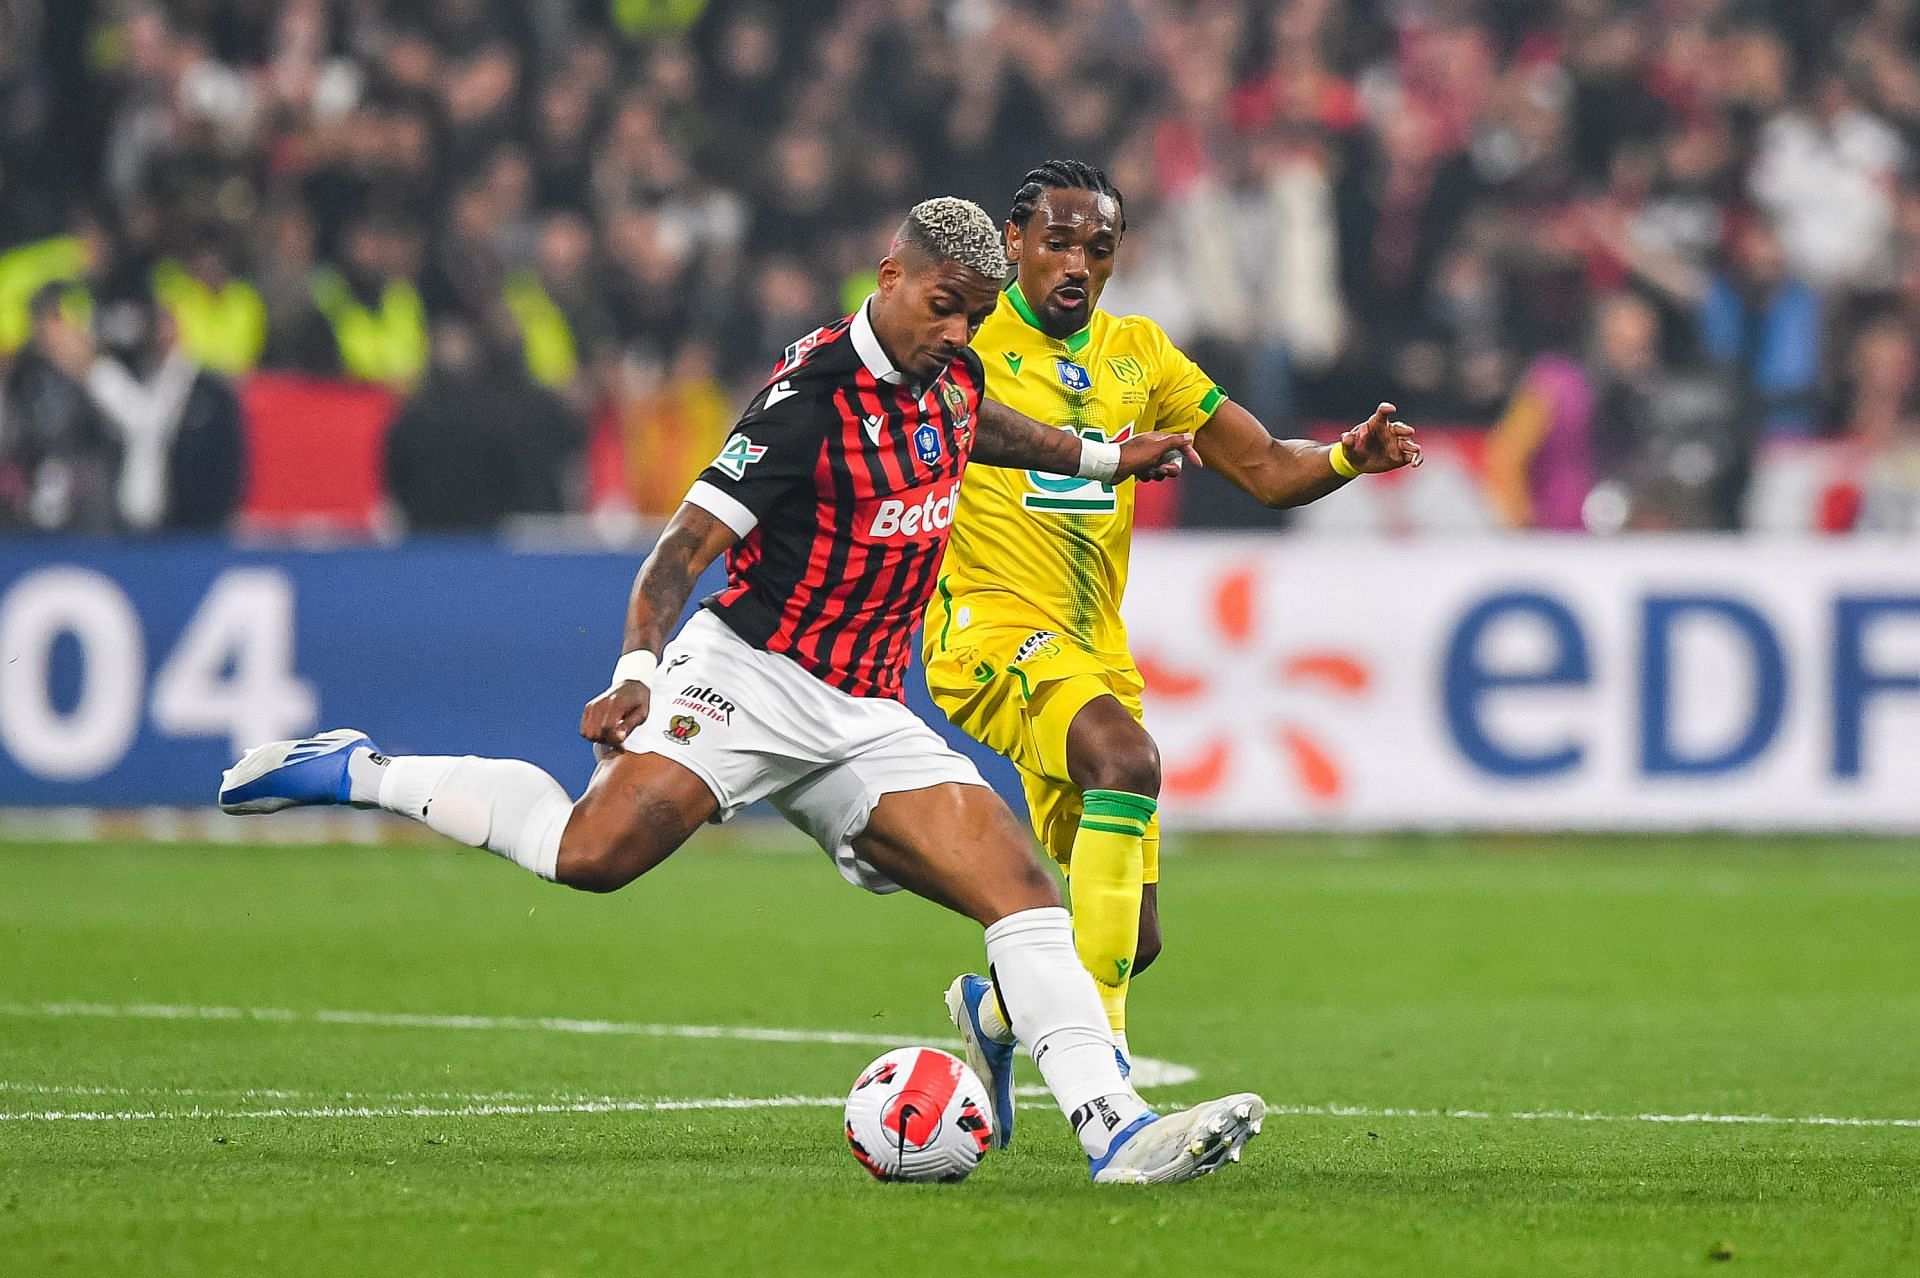 Nantes will take on Nice in the Ligue 1 on Saturday